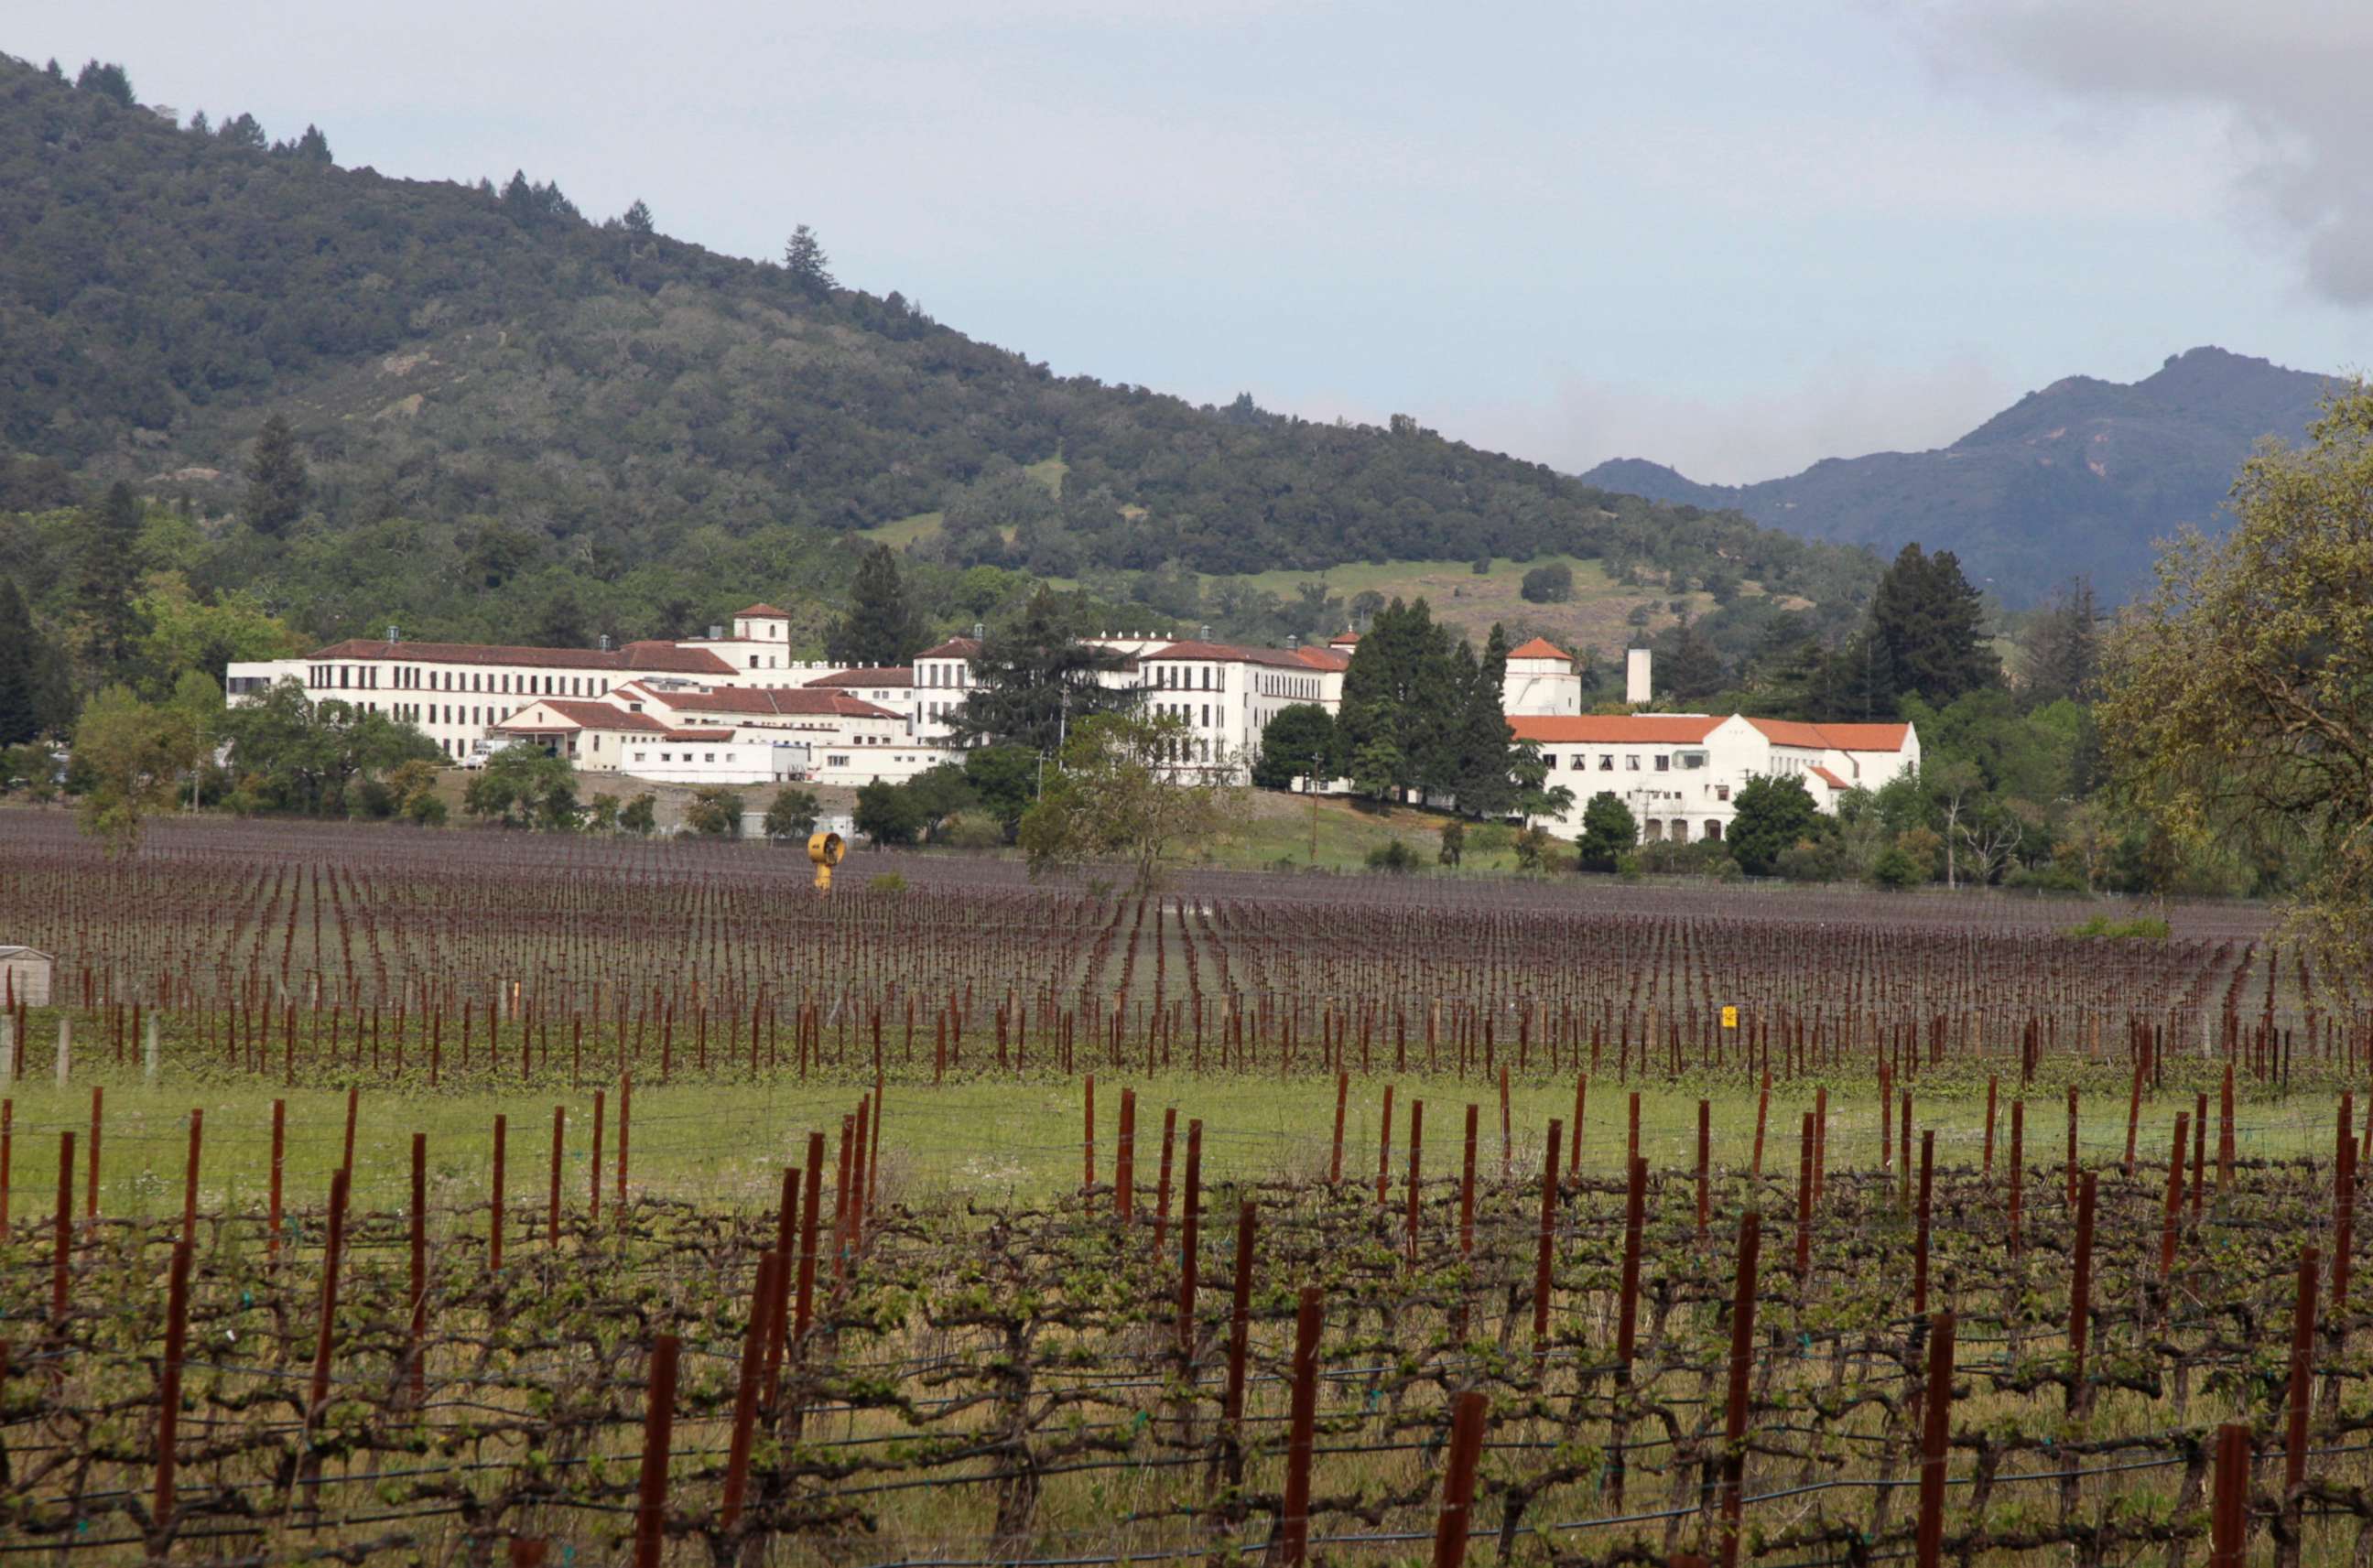 PHOTO: In this April 17, 2011 file photo, vineyards are shown in front of the Veterans Home of California in Yountville, Calif.